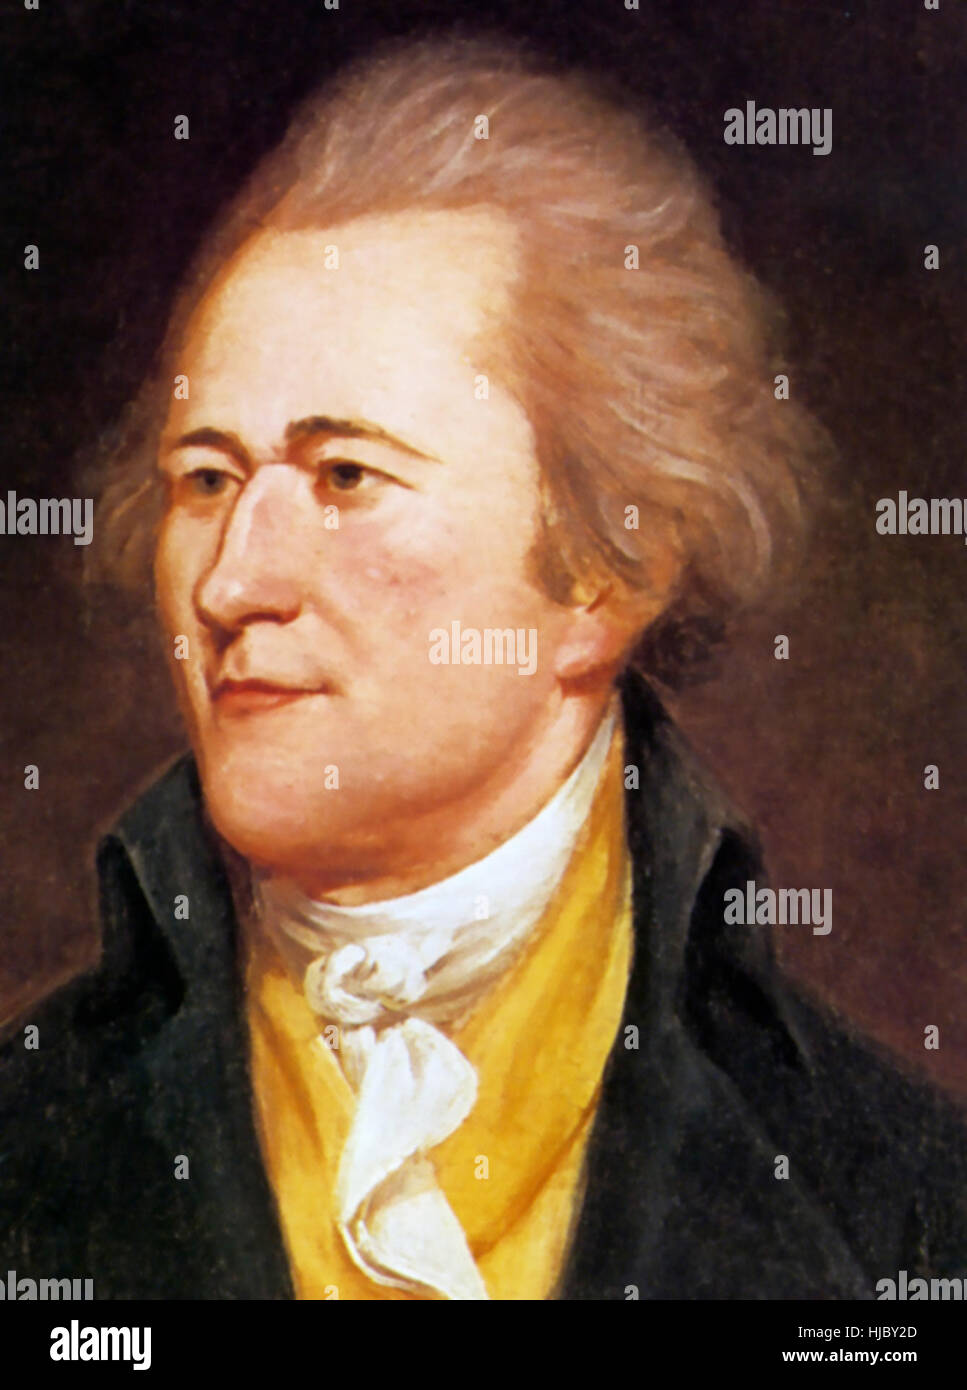 ALEXANDER HAMILTON (1755 ? - 1804) one of the Founding Fathers of the United States Stock Photo